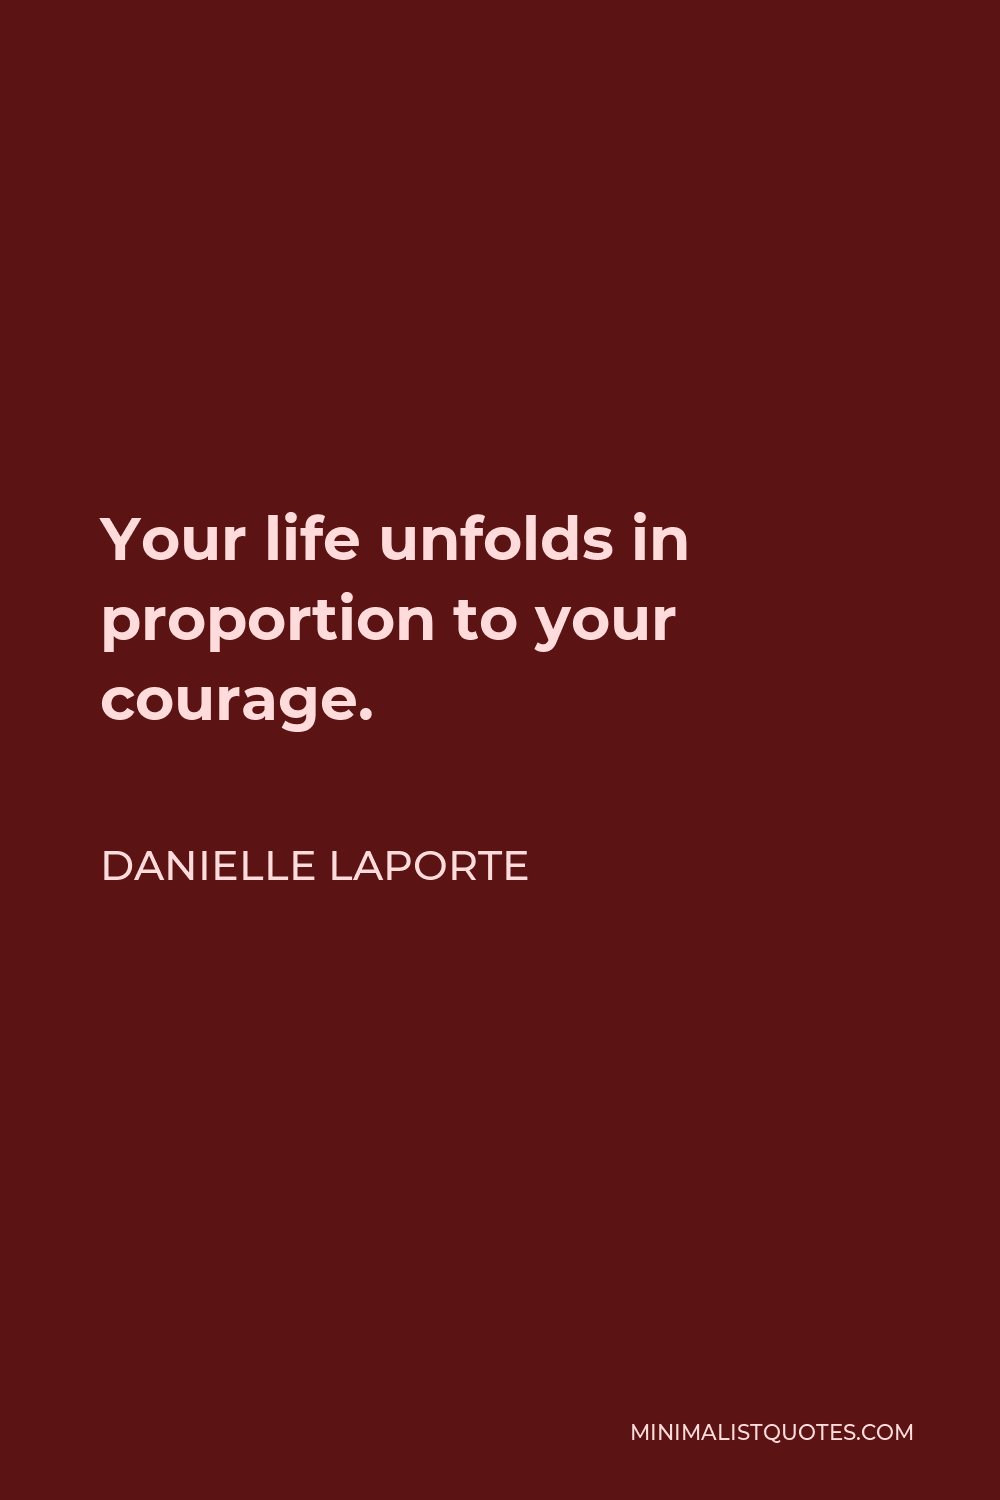 Danielle LaPorte Quote - Your life unfolds in proportion to your courage.